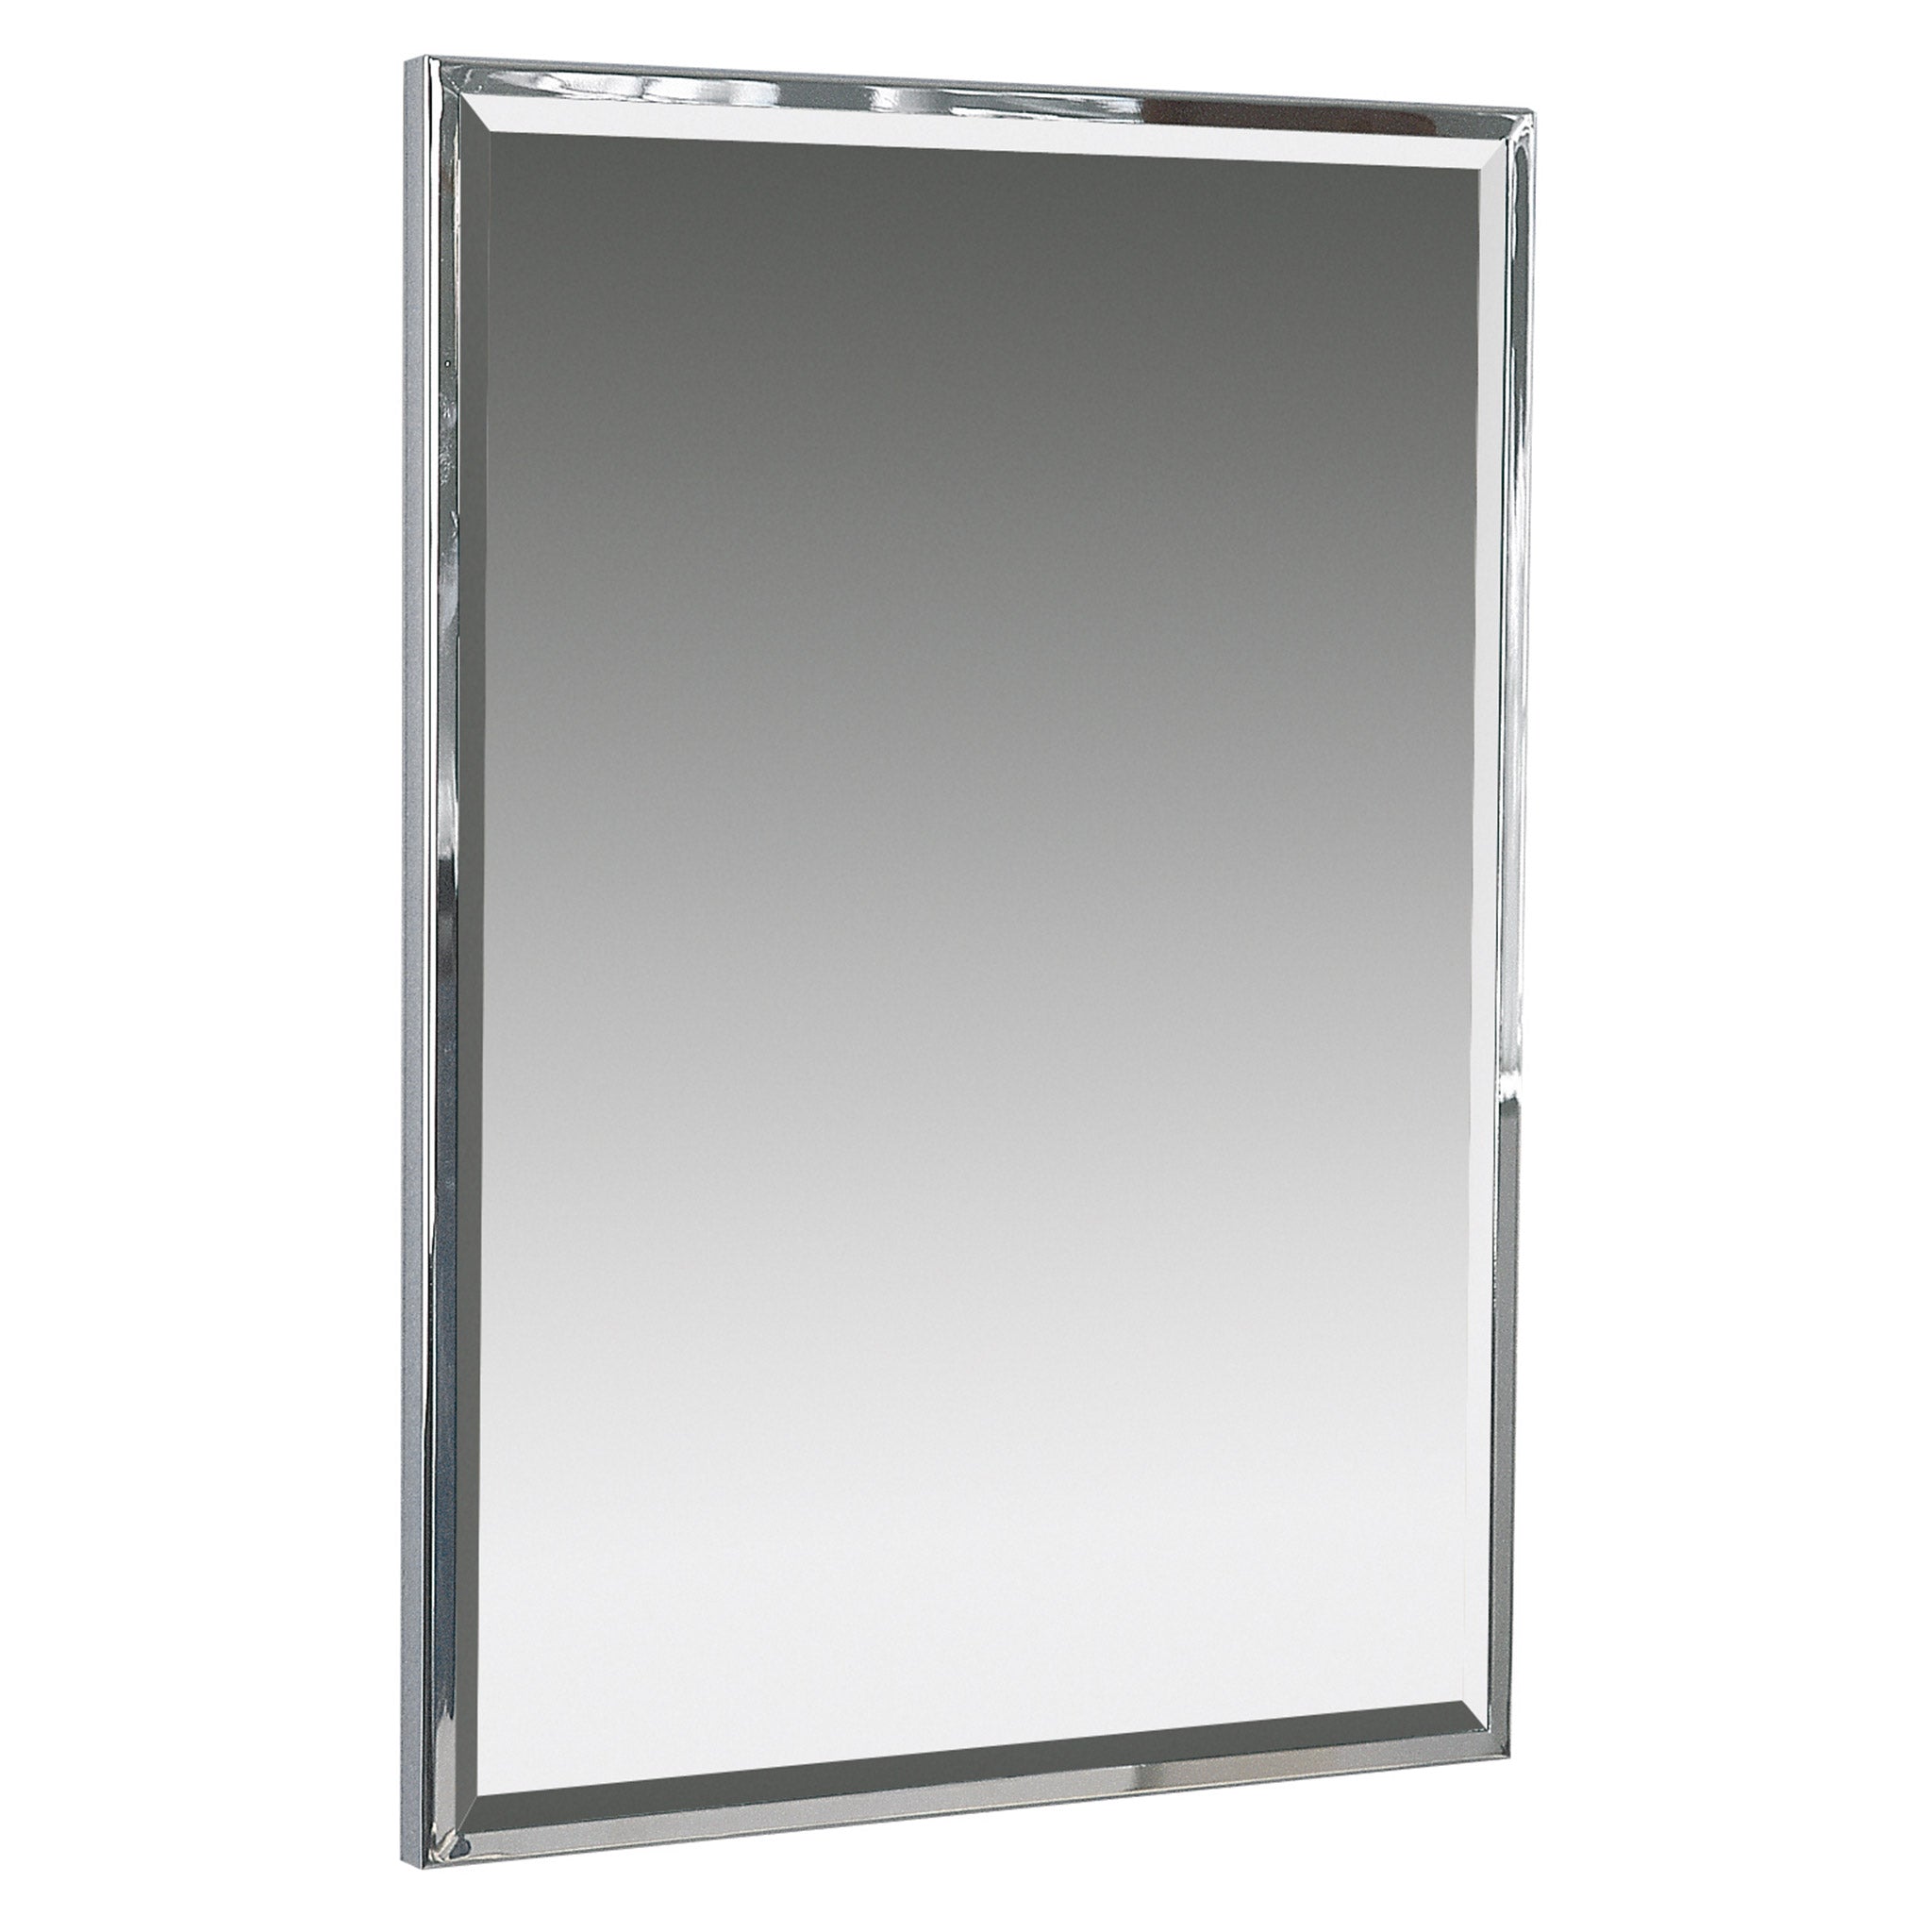 Miller Classic Framed Wall Mounted Mirror